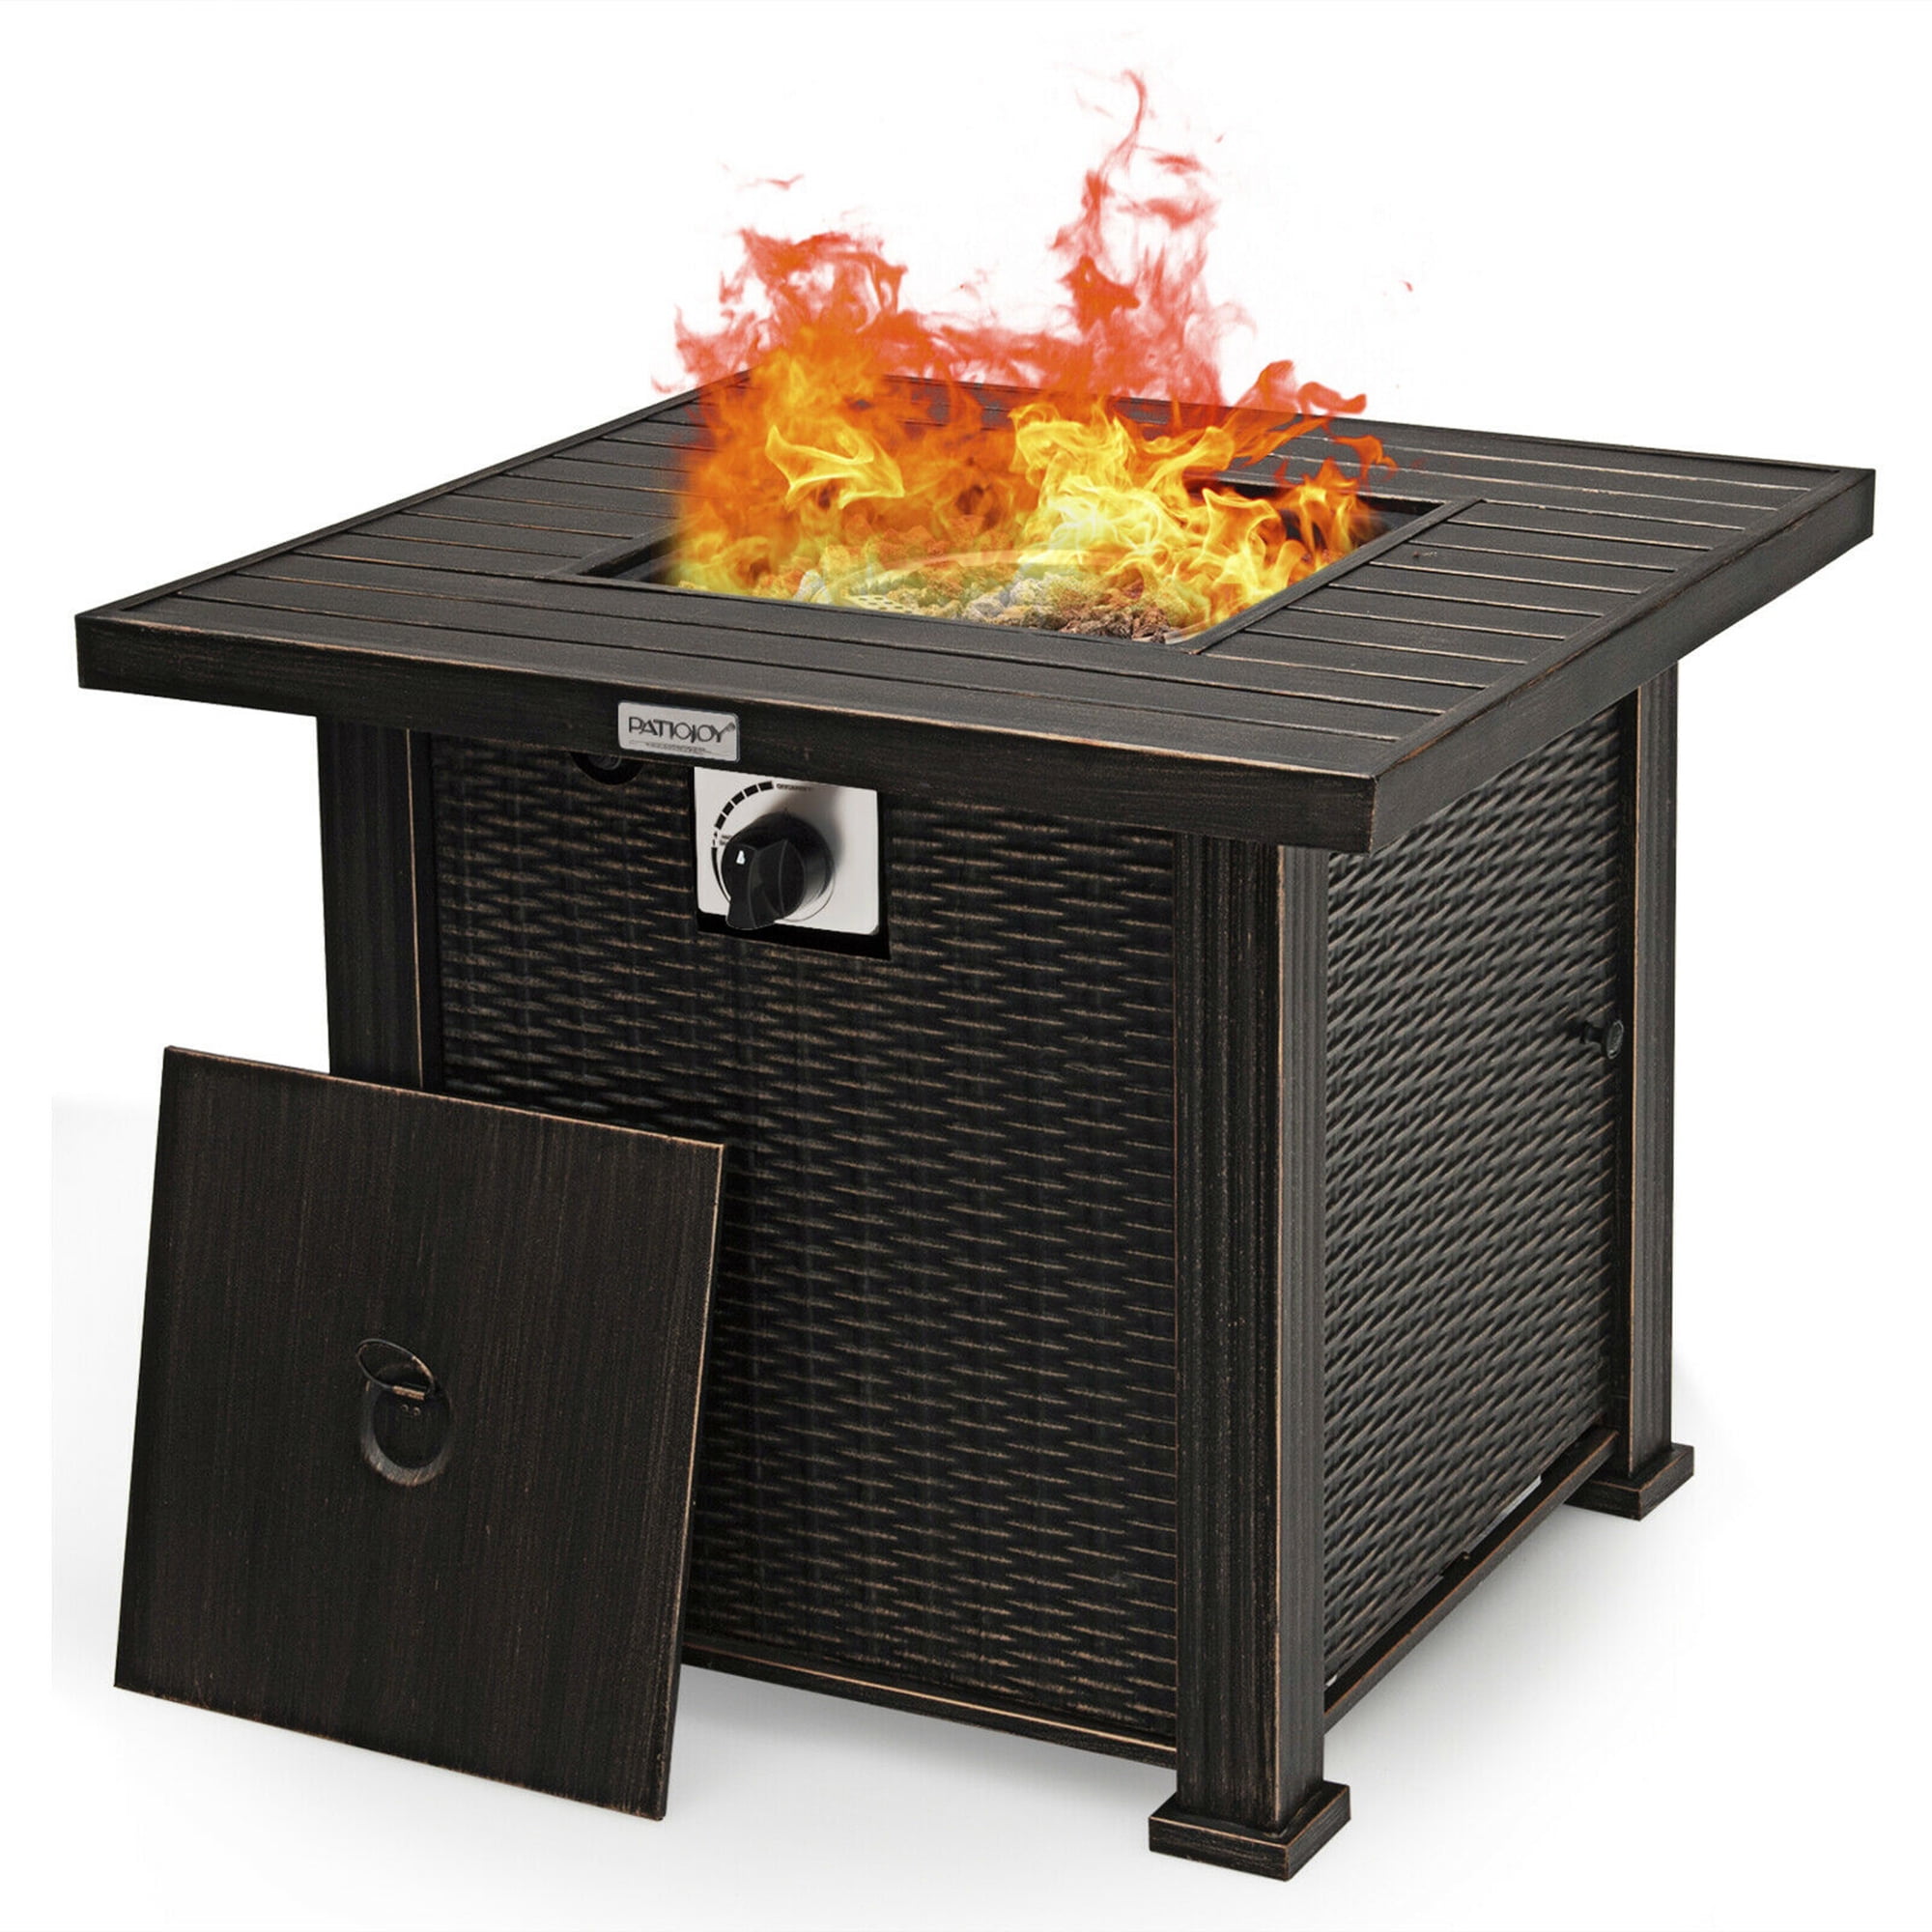 Gymax 30 Gas Fire Pit Table 50 000 Btu, Do Propane Fire Pits Give Off Heat